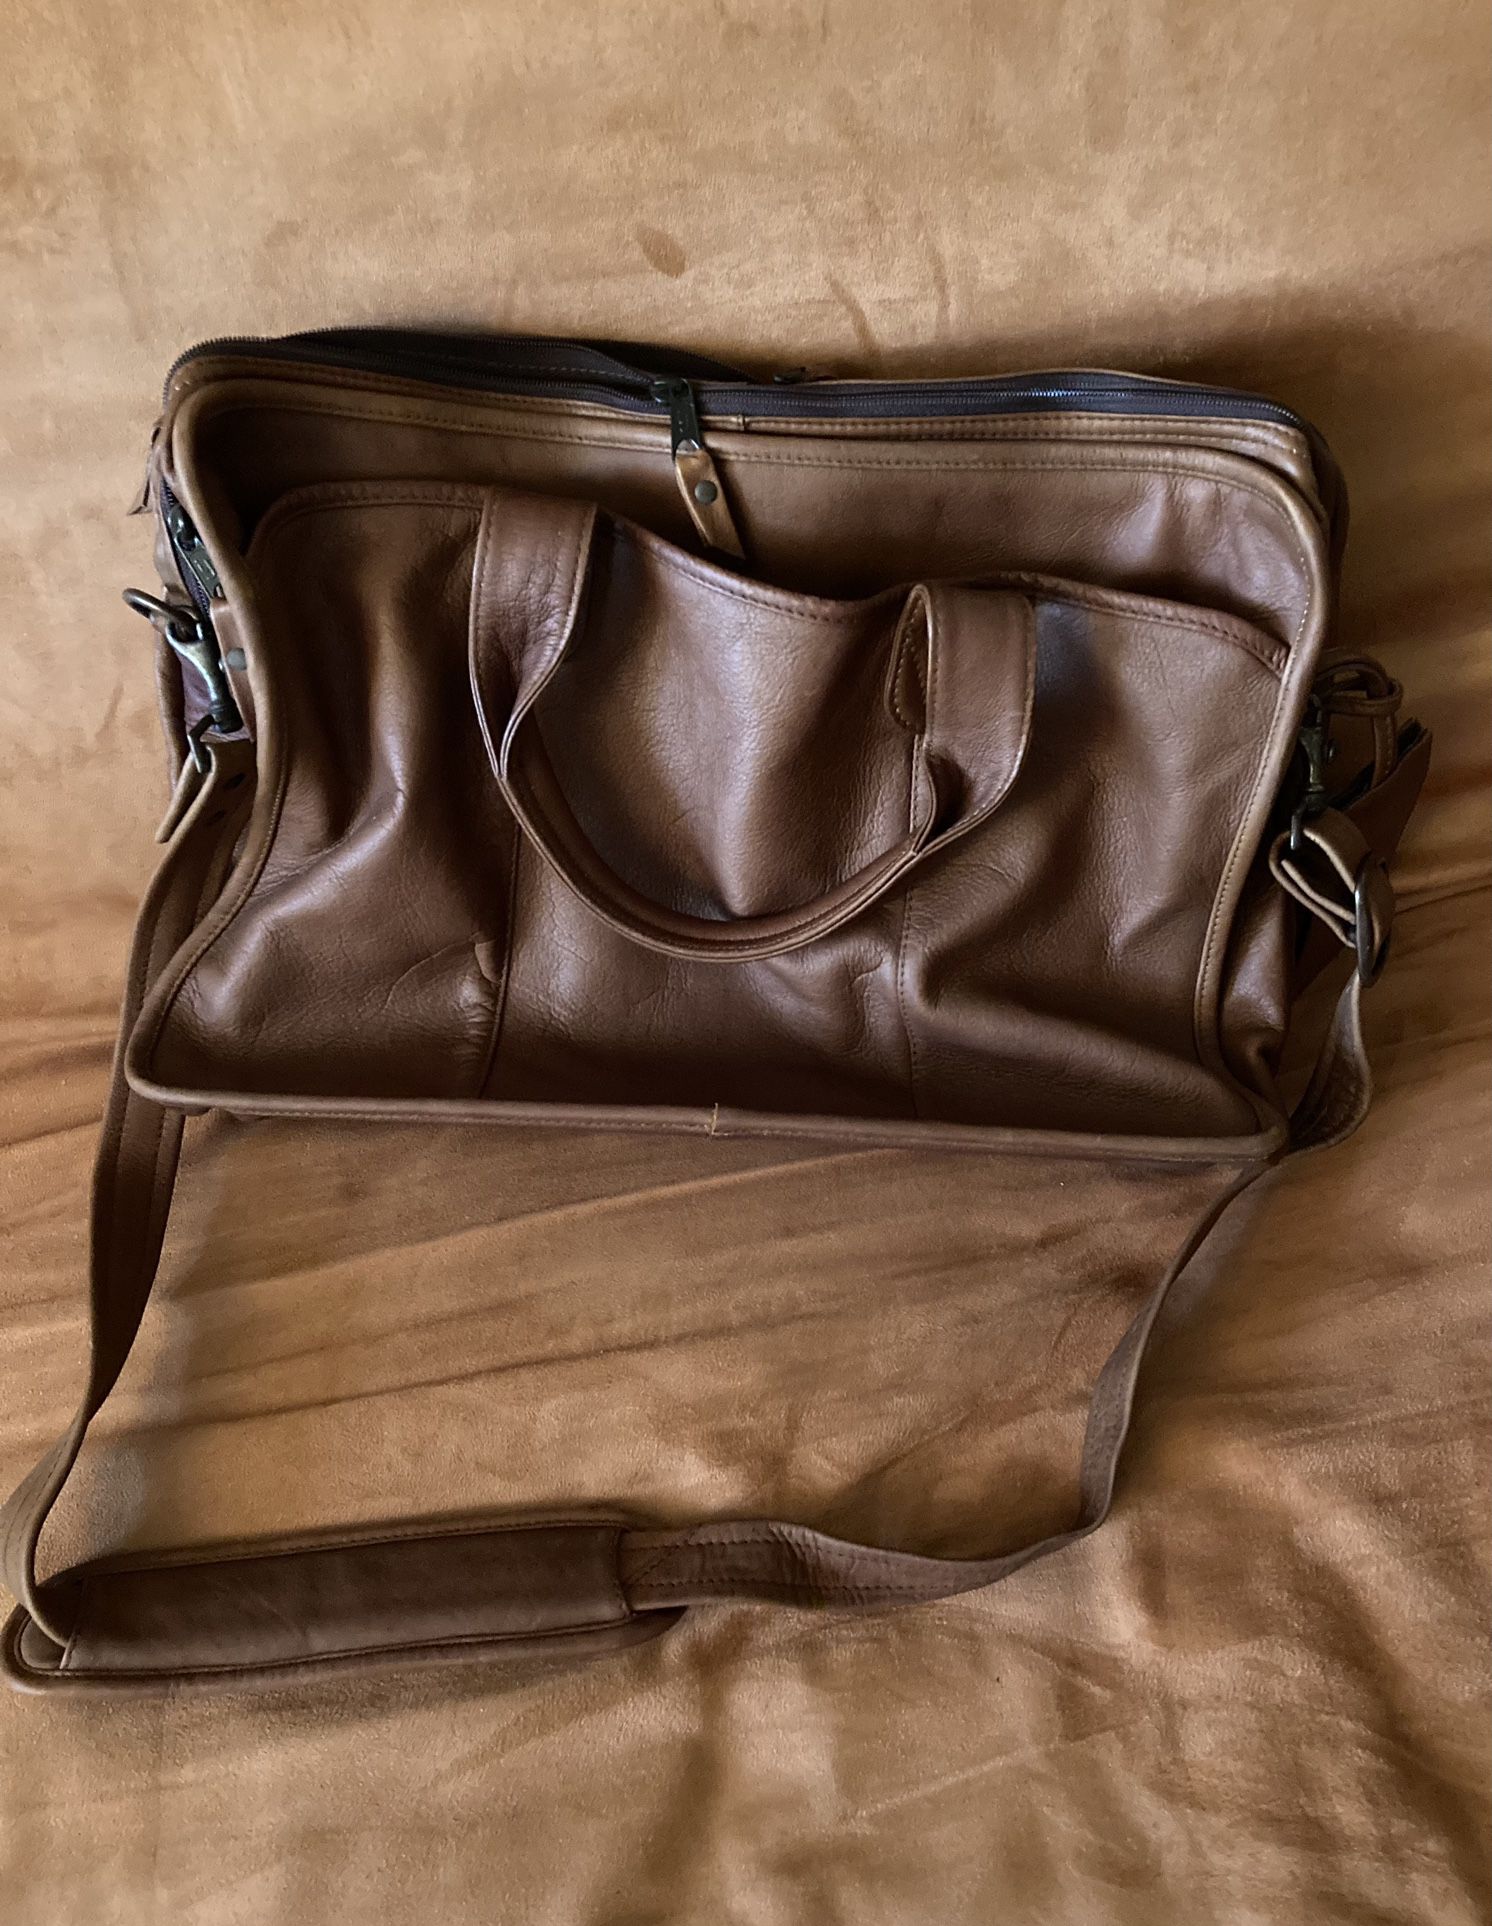 ALL GENUINE LEATHER BRIEFCASE NEVER USED